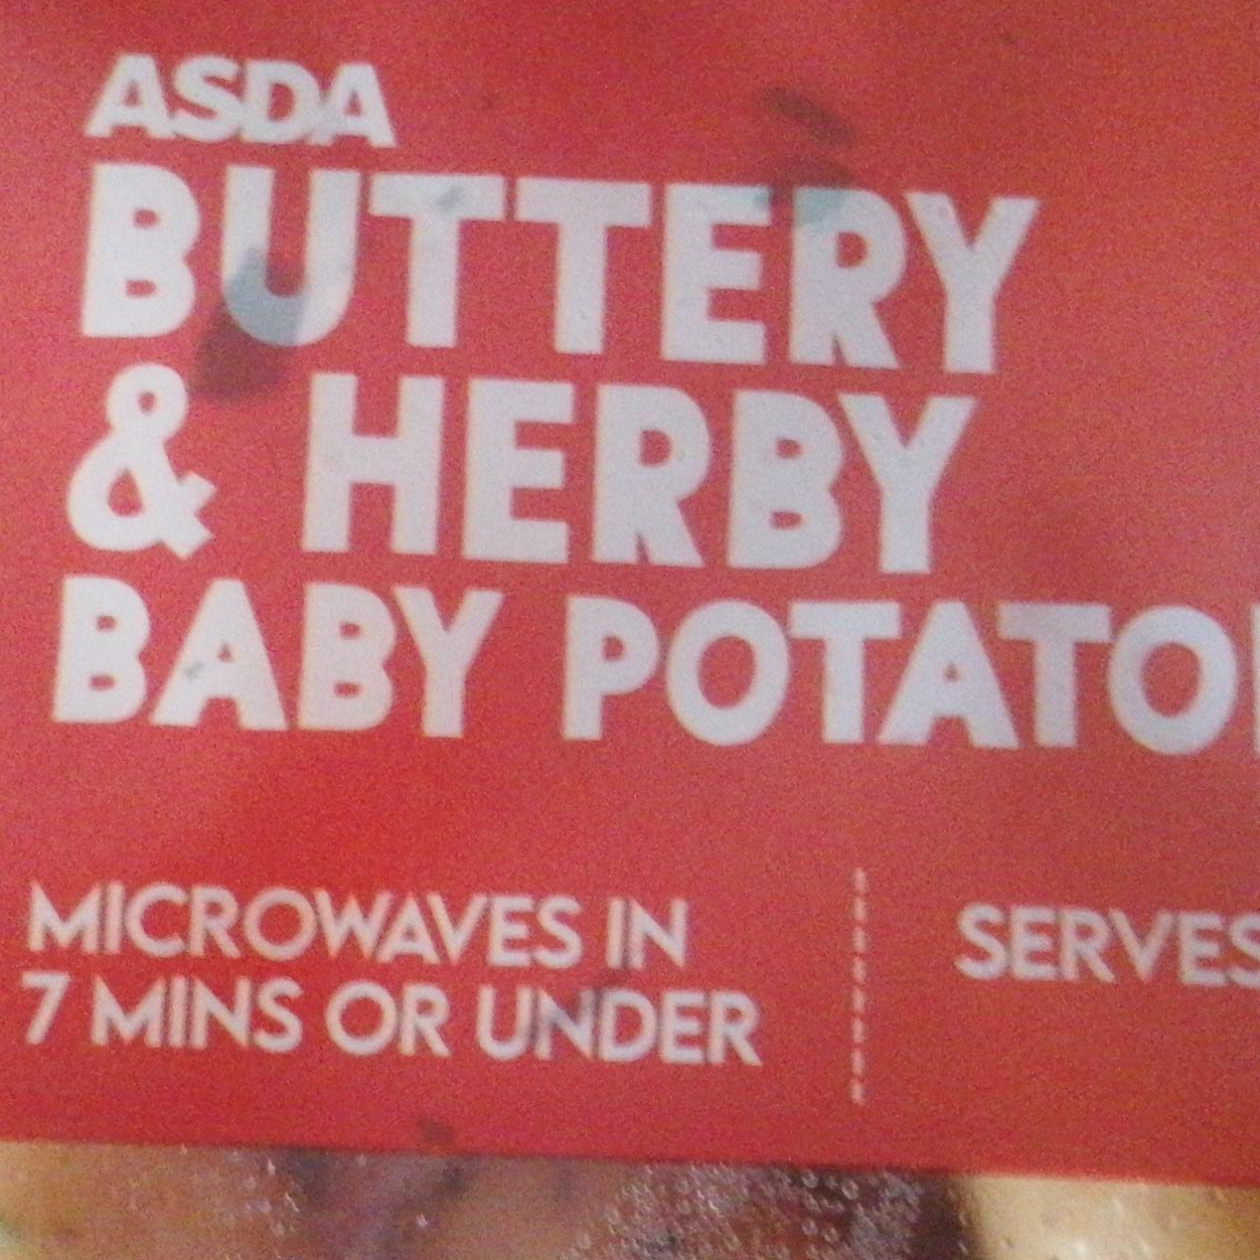 Fotografie - Buttery & herby baby potatoes Asda